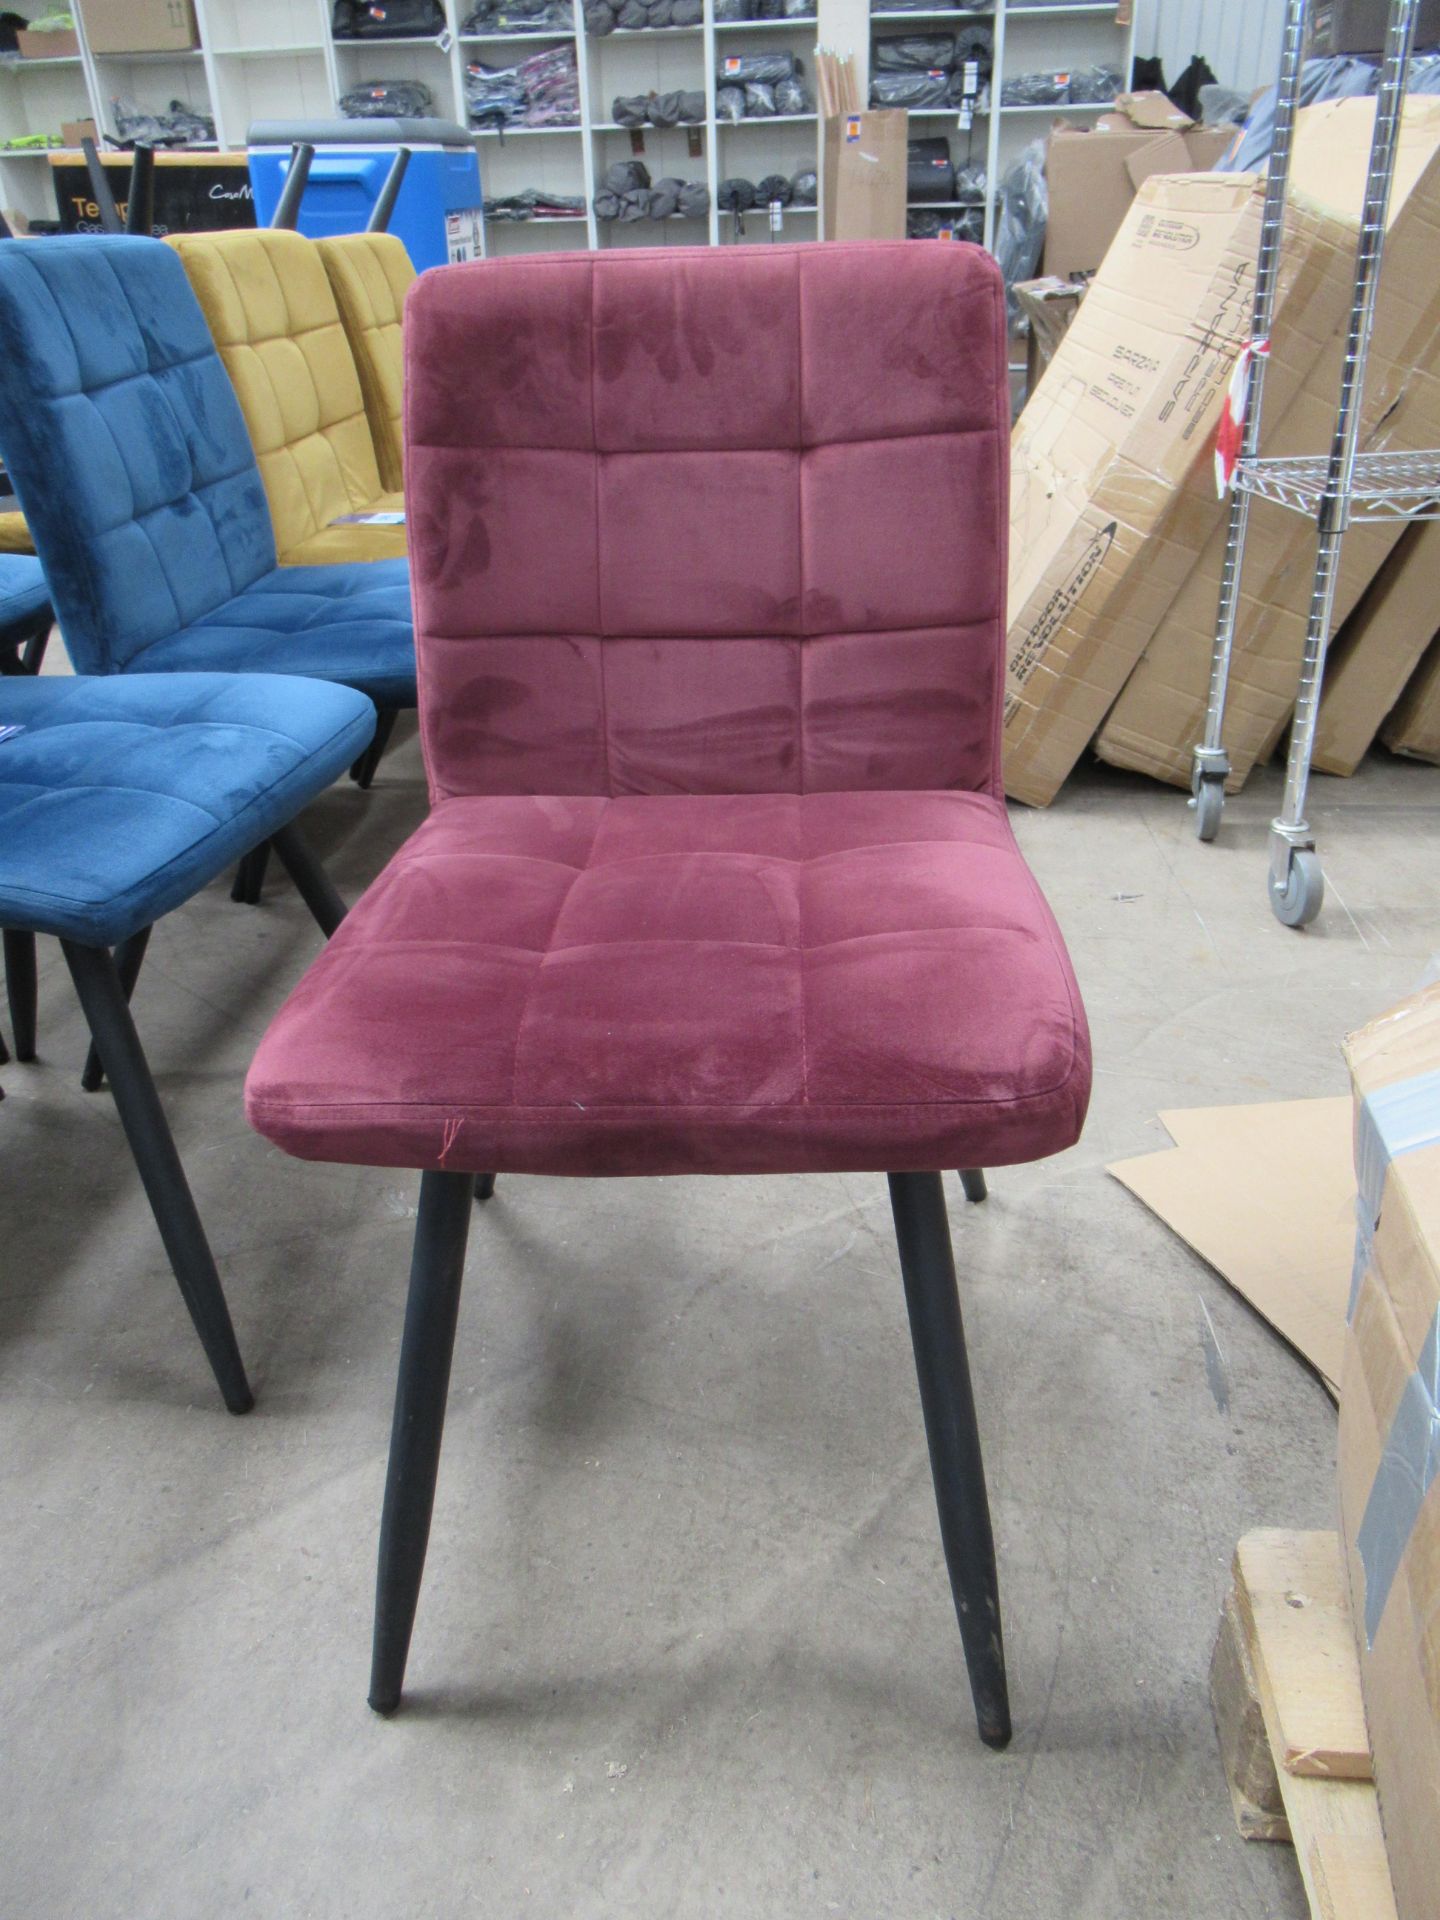 4x Maroon Suede Effect Chairs - Image 2 of 2